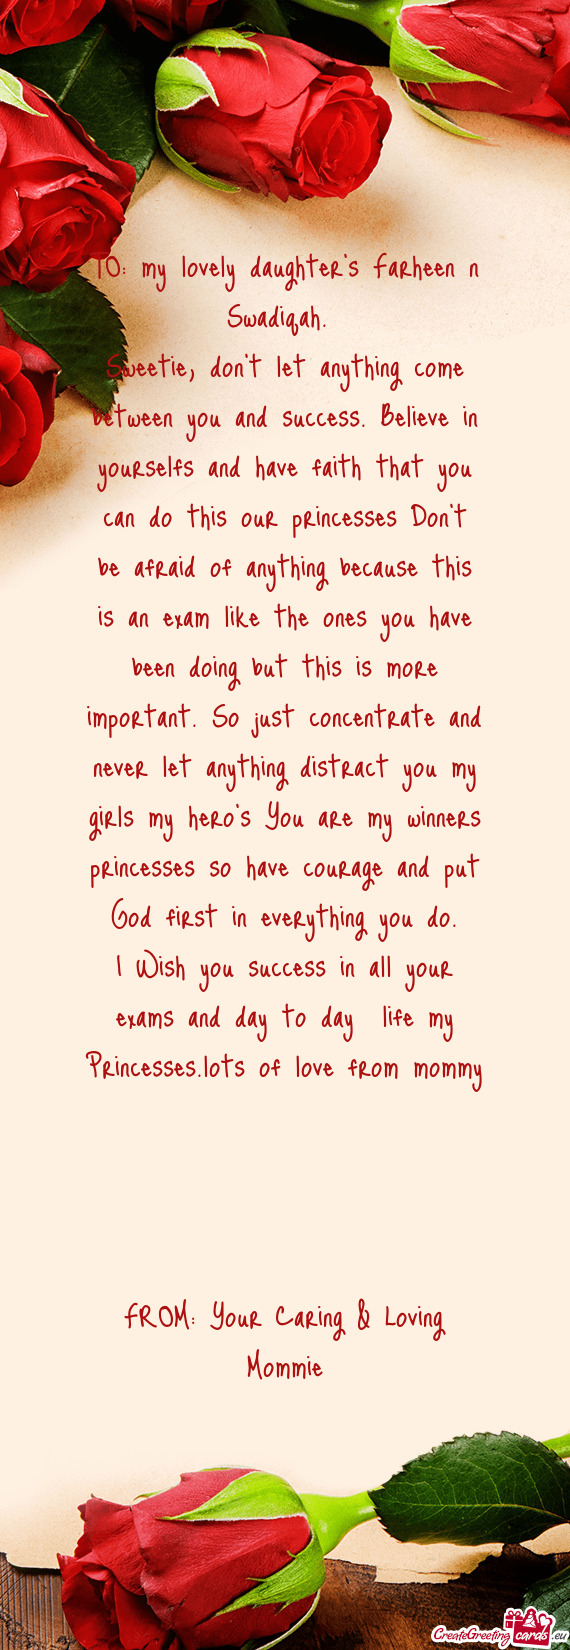 TO: my lovely daughter